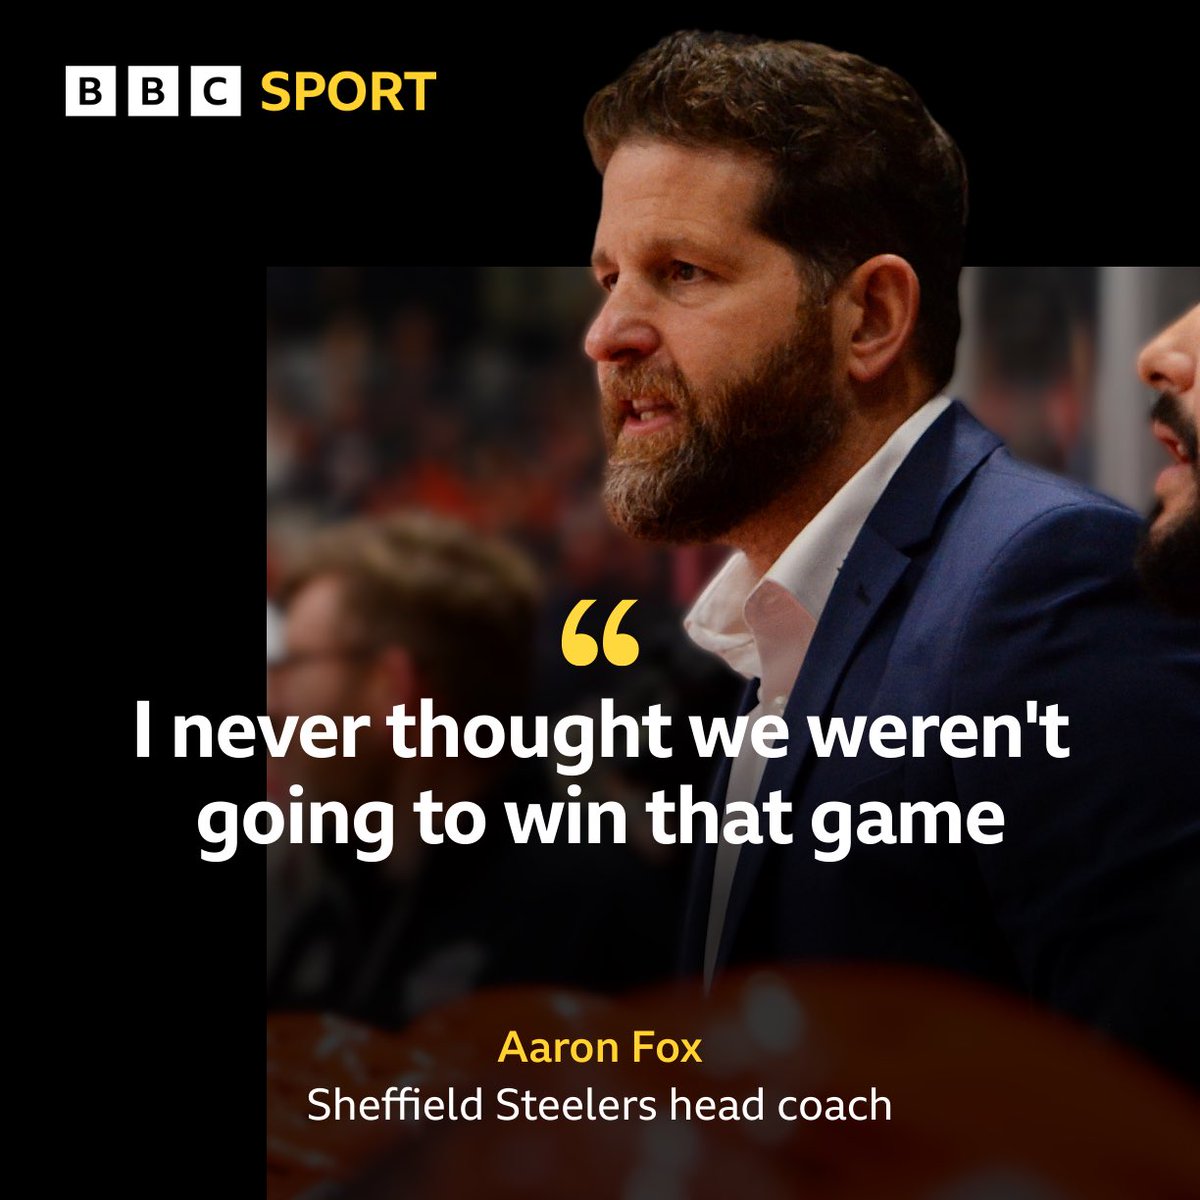 VIDEO: Sheffield Steelers head coach Aaron Fox speaks after 3-2 overtime win over Coventry Blaze. Fox praises goalscorers Patrick Watling, Mitchell Balmas & Colton Saucerman and gives an update on the injury to Brandon Whistle. Watch here ➡️ bbc.co.uk/programmes/p0g…